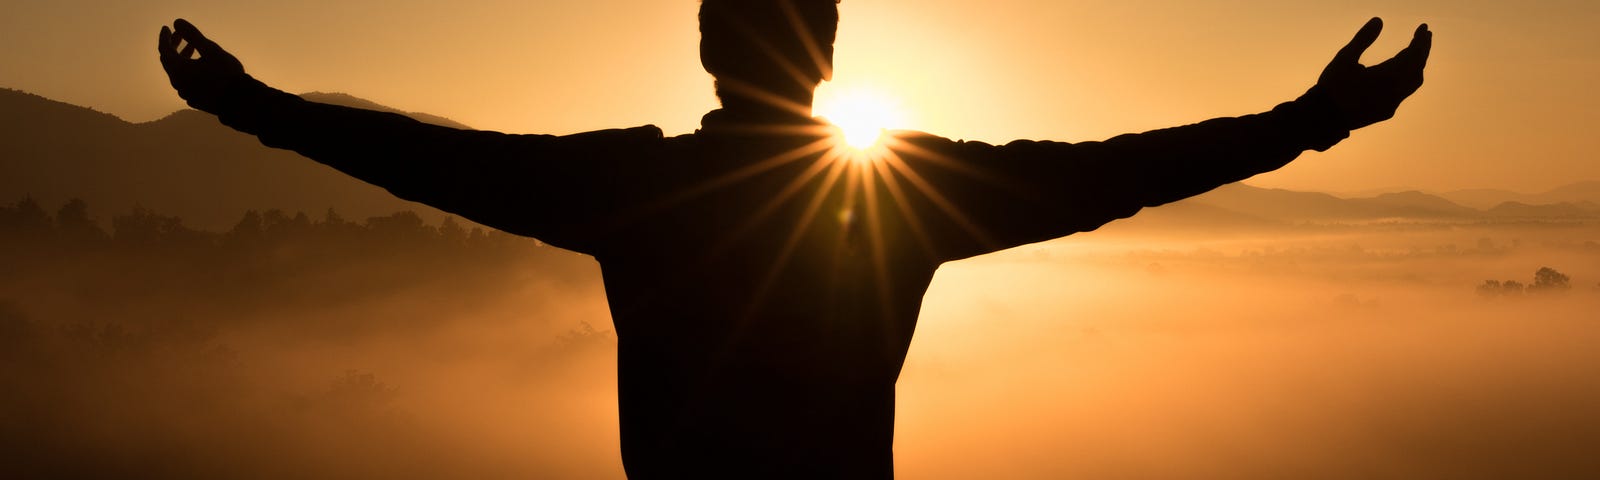 A silhouette of a man with outstretched arms looking at sunset.